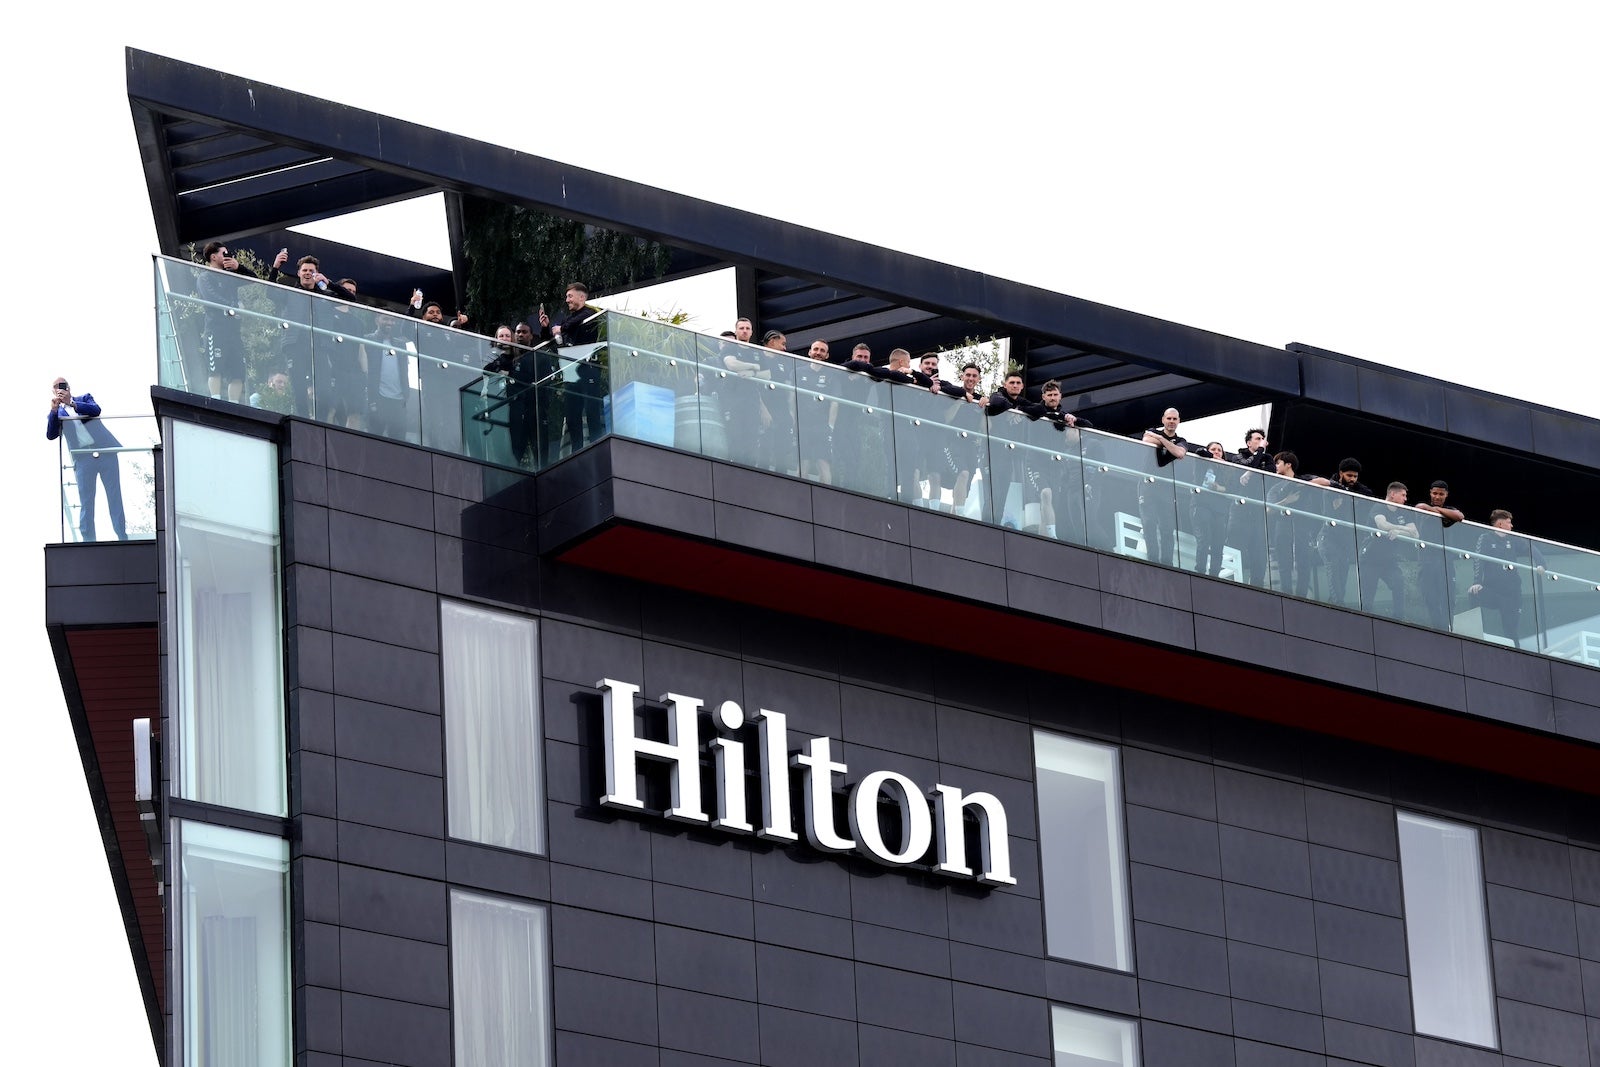 7 insights I learned from Hilton executives on new brands, partnerships and hotel innovations